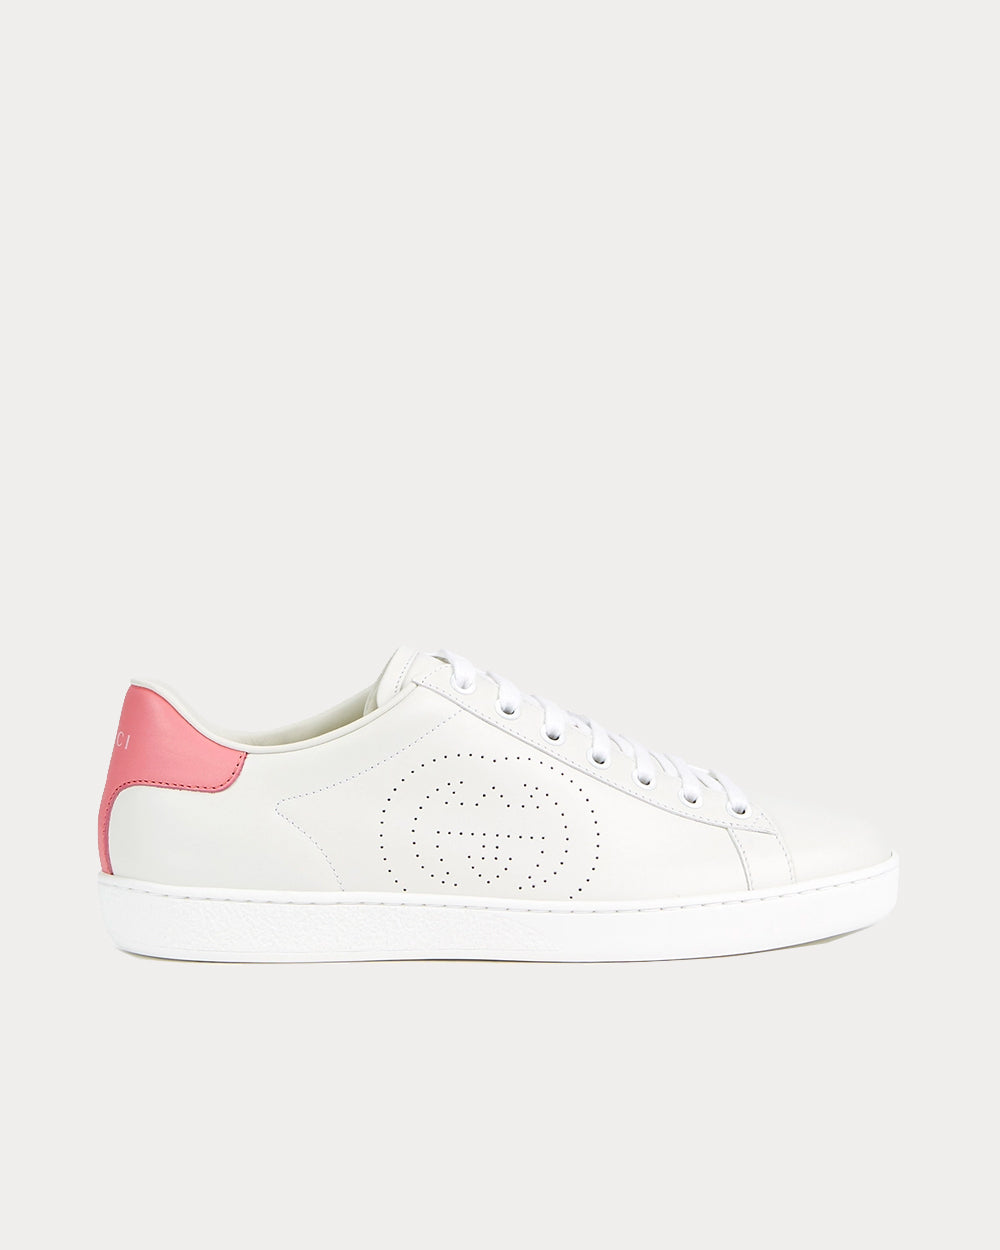 Gucci - Ace Interlocking G White / Pink Low Top Sneakers